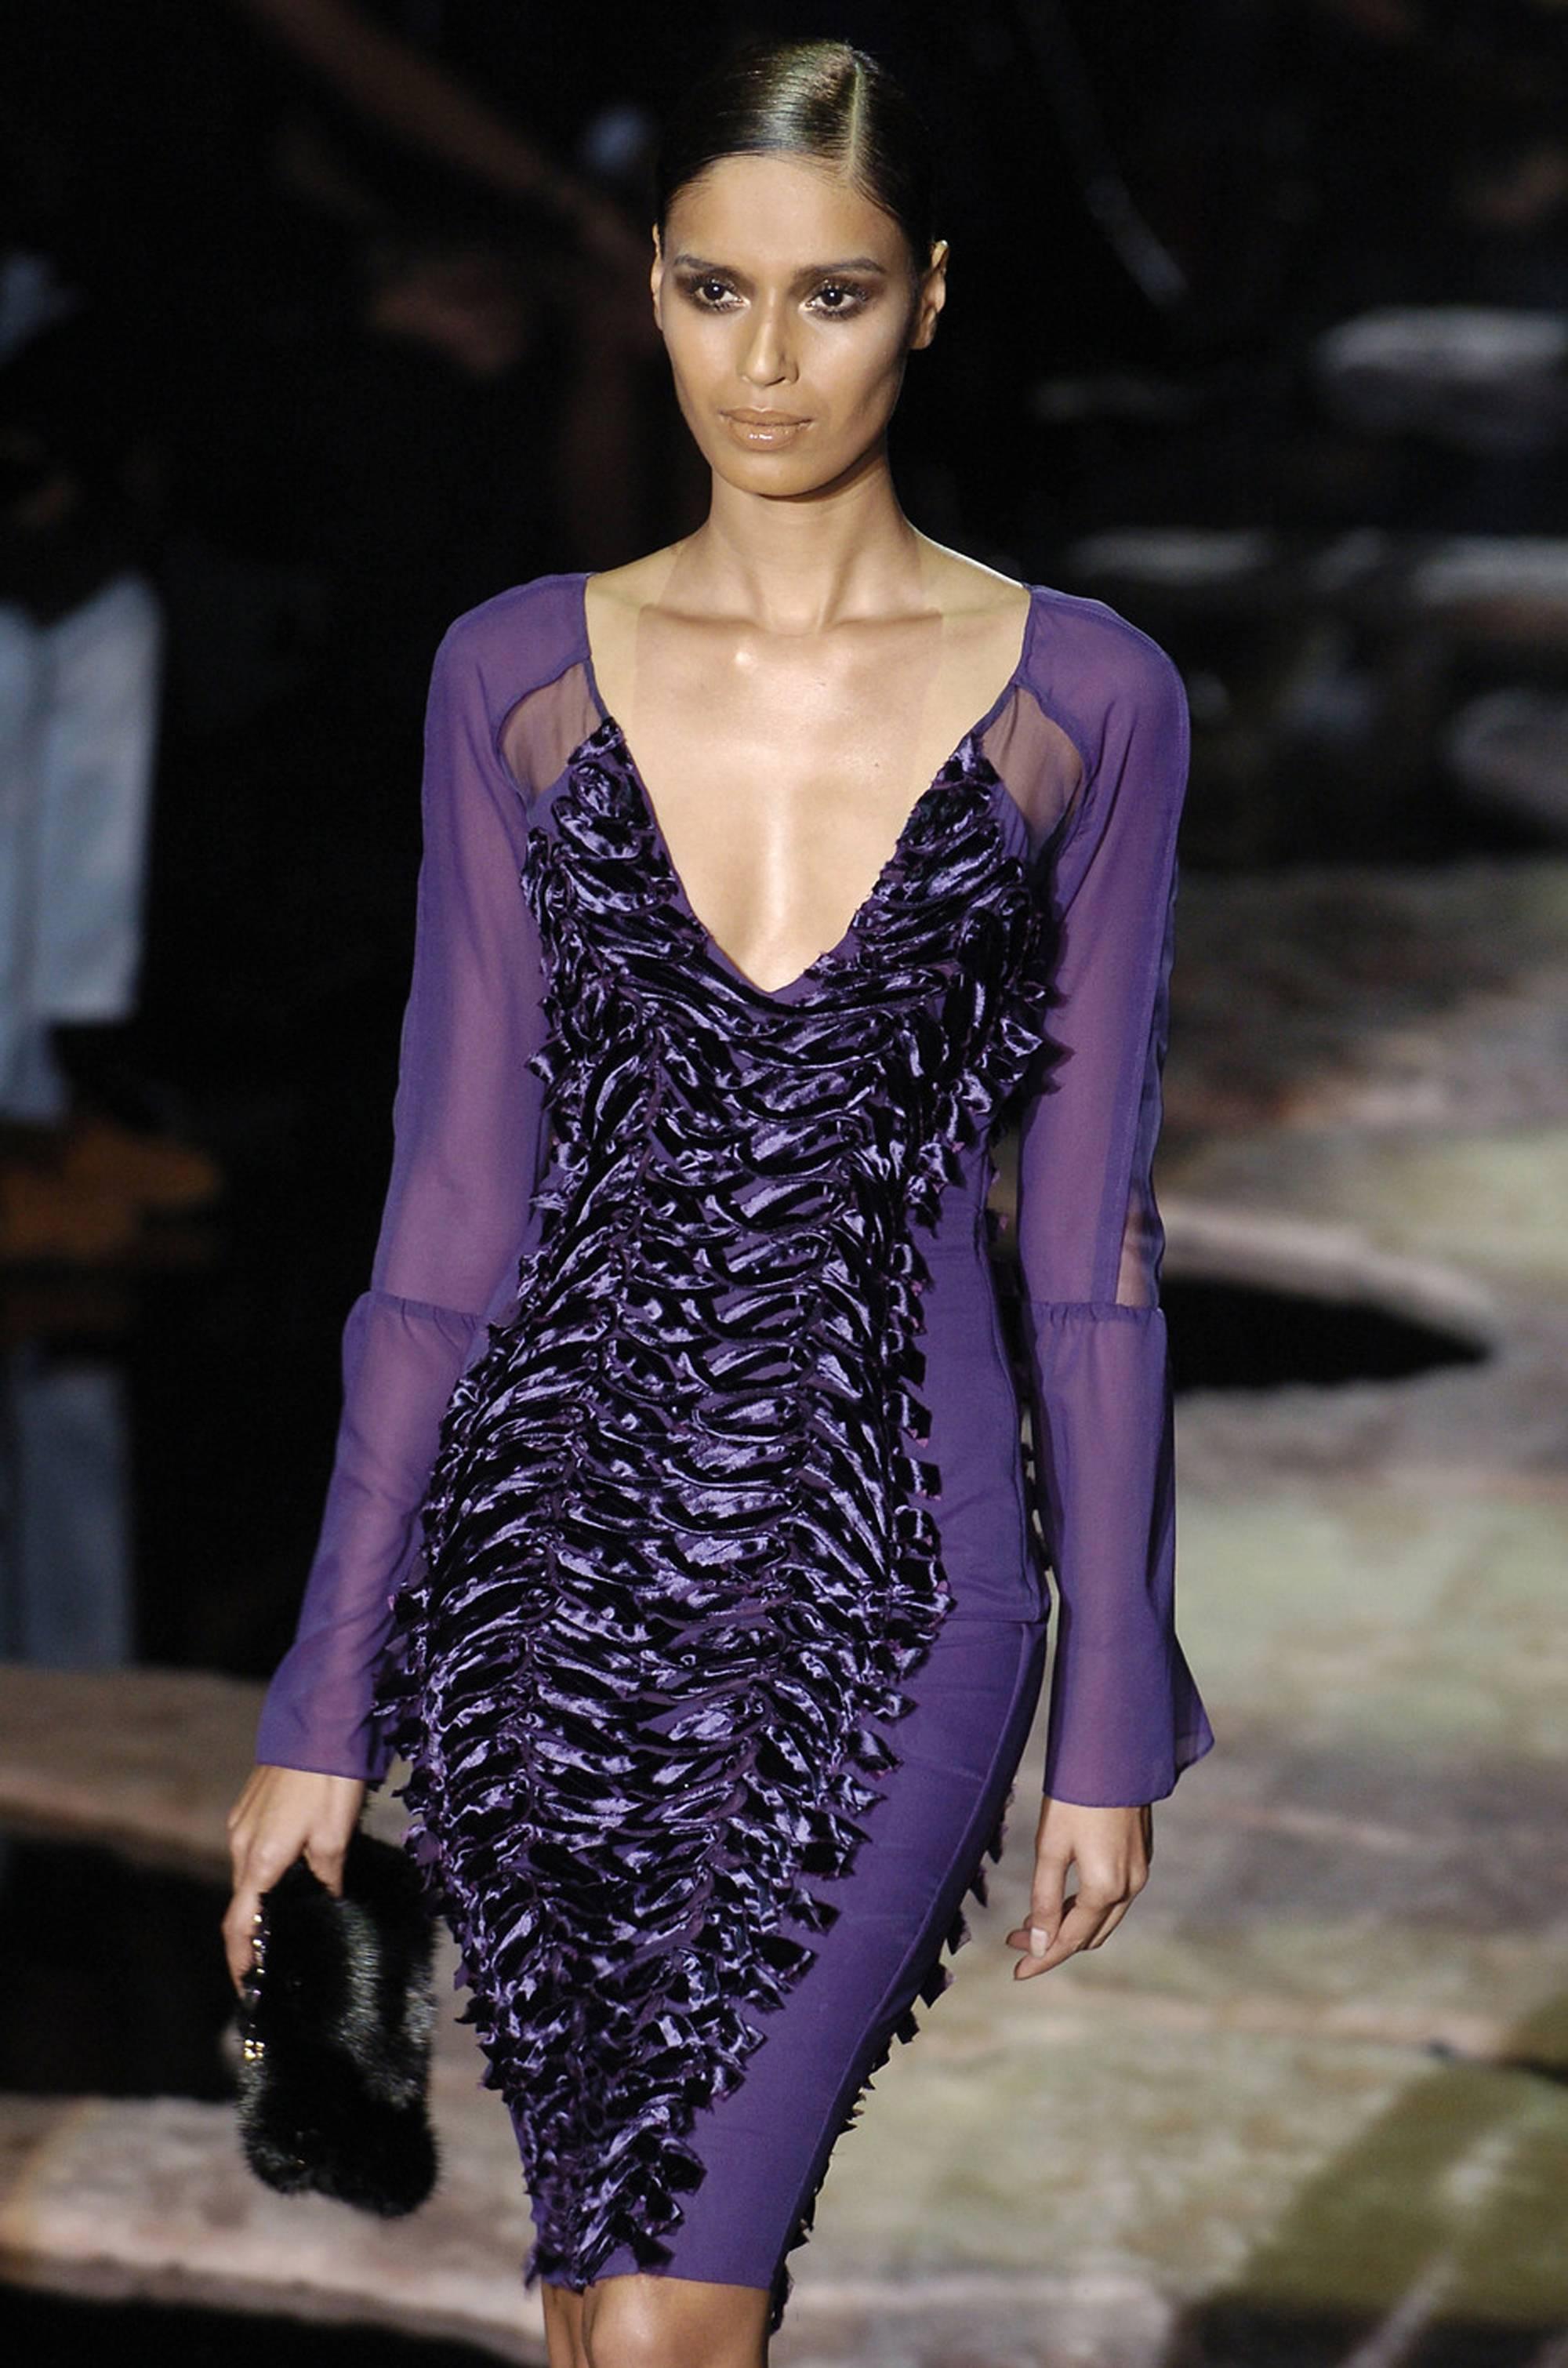 TOM FORD for GUCCI Runway Purple Stretch Dress
2004 F/W Collection
Italian Size 40 – US 4
Color – Purple
Velvet Front & Back
60% Polyester, 20% Rayon, 10% Spandex, 10% Silk
Measurements: Length – 40 inches, Waist – 28 inches, Hip - 34 inches.
Side